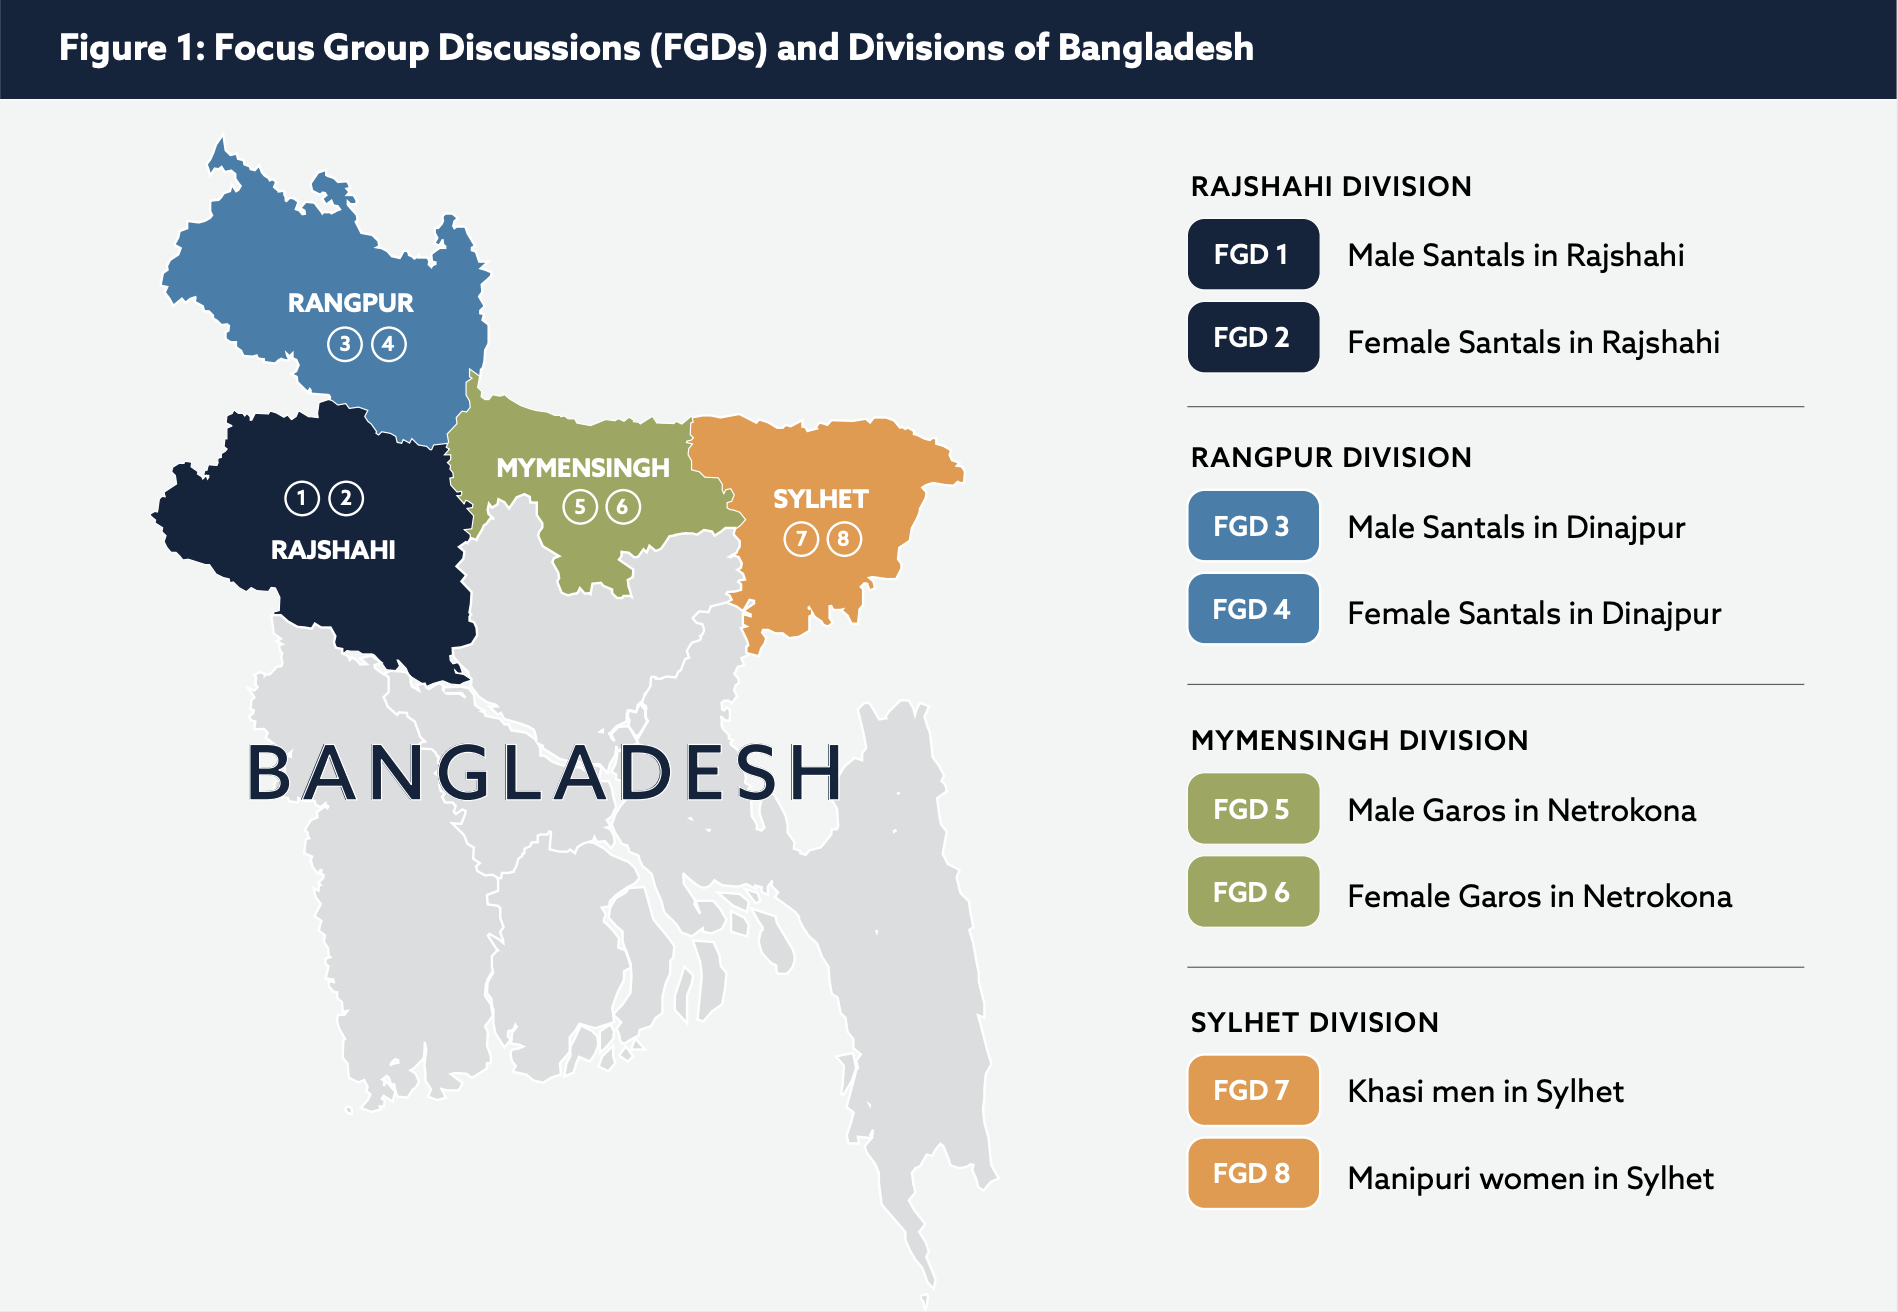 Figure 1: Focus Group Discussions (FGDs) and Divisions of Bangladesh.  A map showing four divisions: Rajshahi (FGD 1: Male Santals in Rajshahi; FGD 2: Female Santals in Rajshahi), Rangpur (FGD 3: Male Santals in Dinajpur; FGD 4: Female Santals in Dinajpur), Mymensingh (FGD 5: Male Garos in Netrokona; FGD 6: Female Garos in Netrokona), Sylhet (FGD 7: Khasi men in Sylhet; FGD 8: Manipuri women in Sylhet)